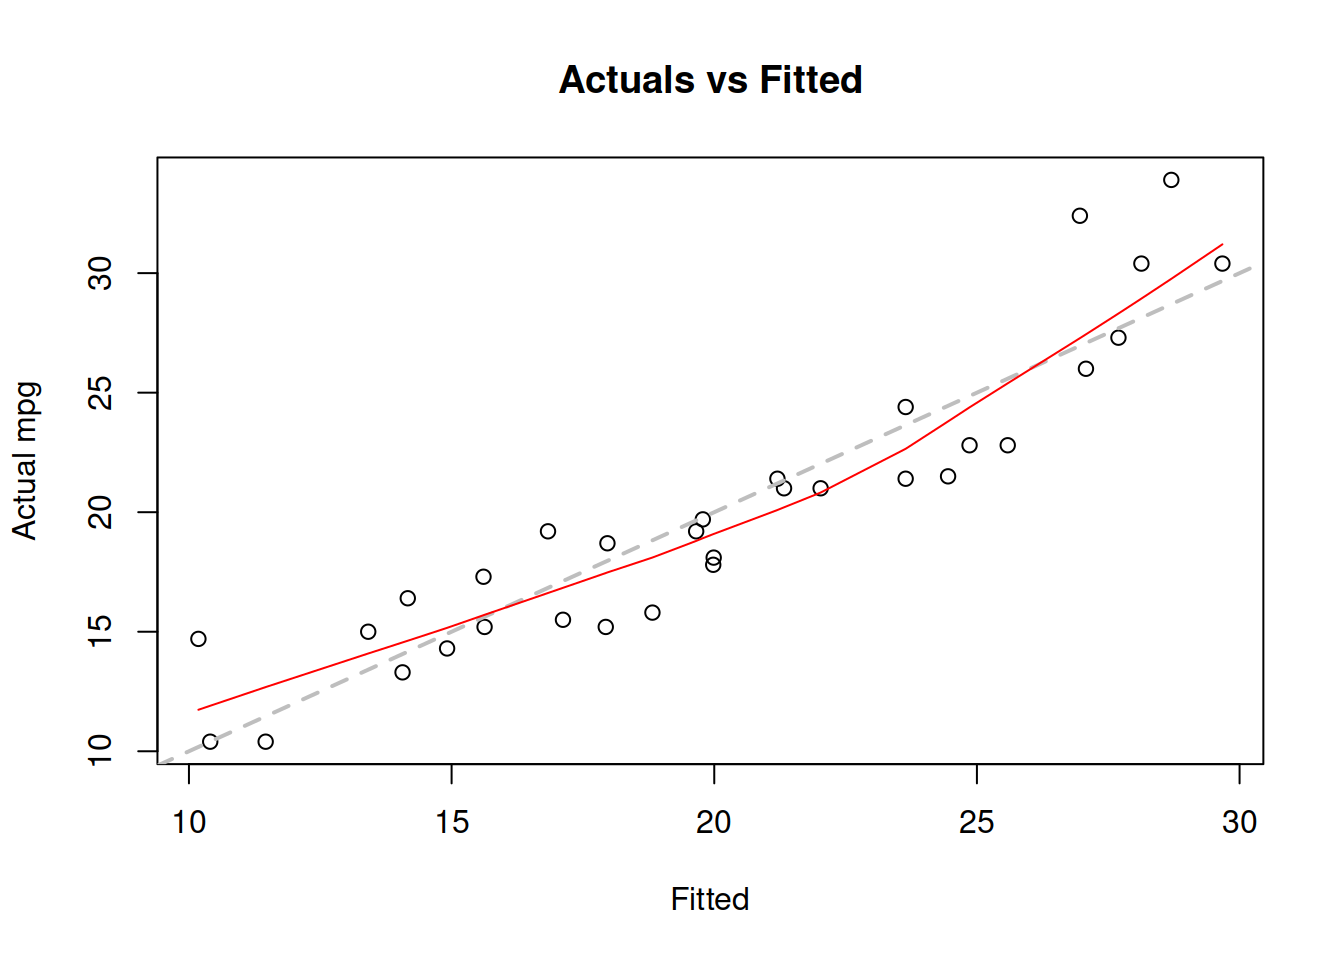 Actuals vs fitted values for multiple linear regression model on mtcars data.